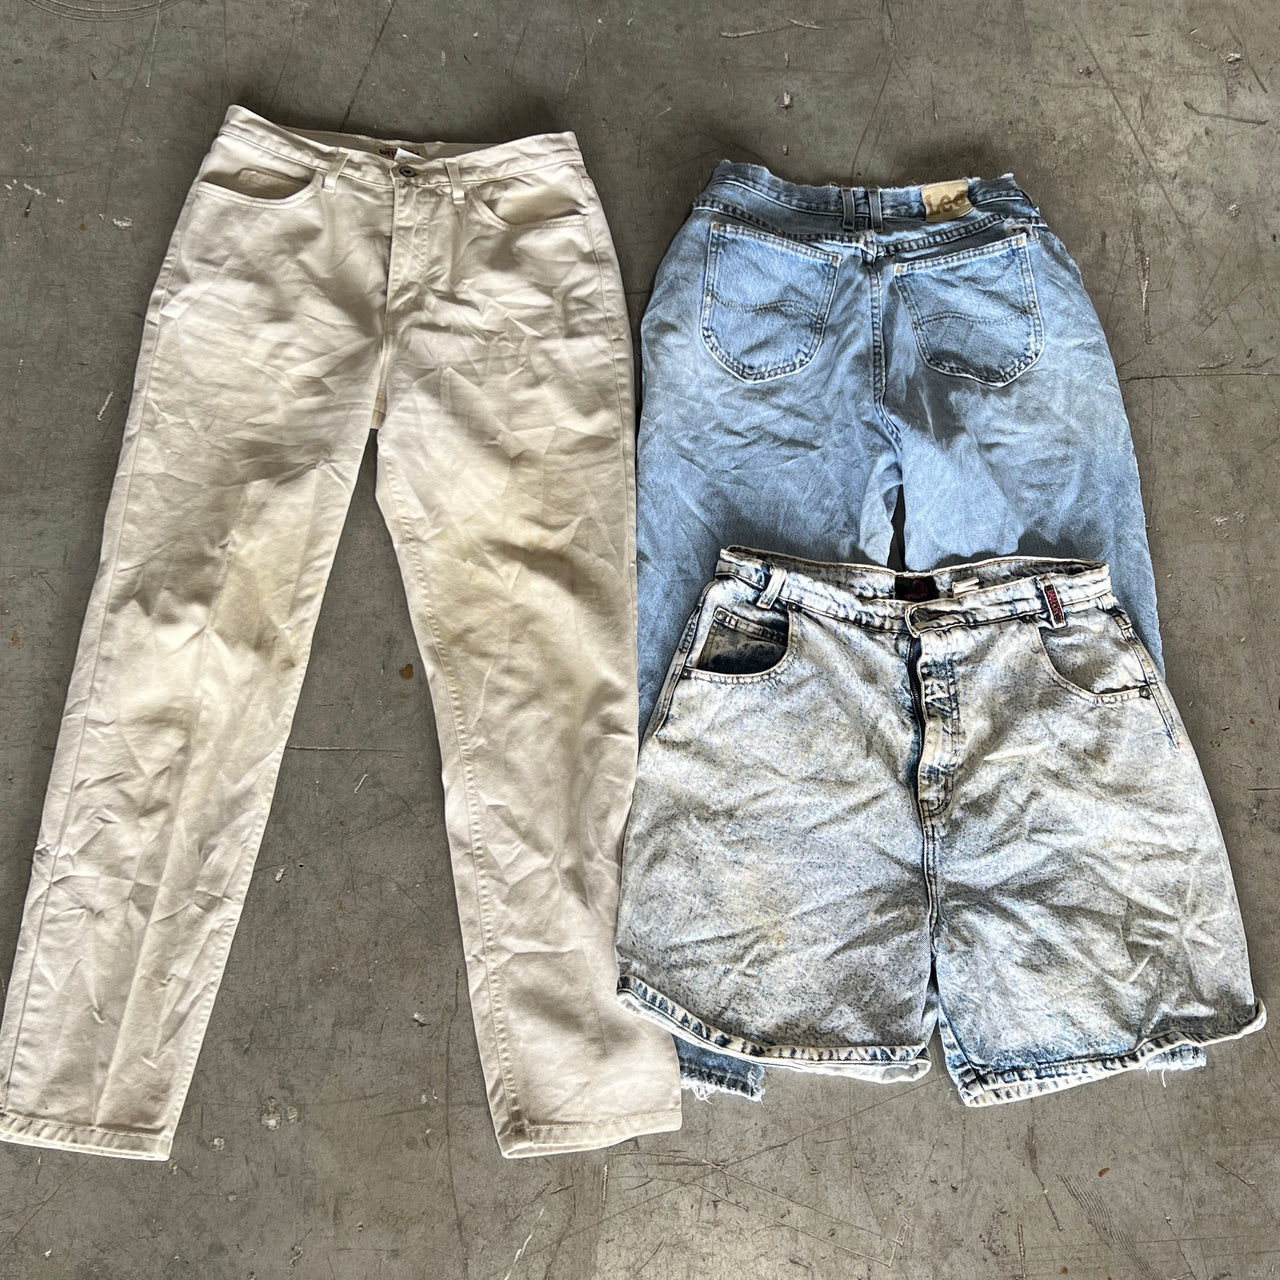 100lb Thrashed & Stained Denim Jeans Bale